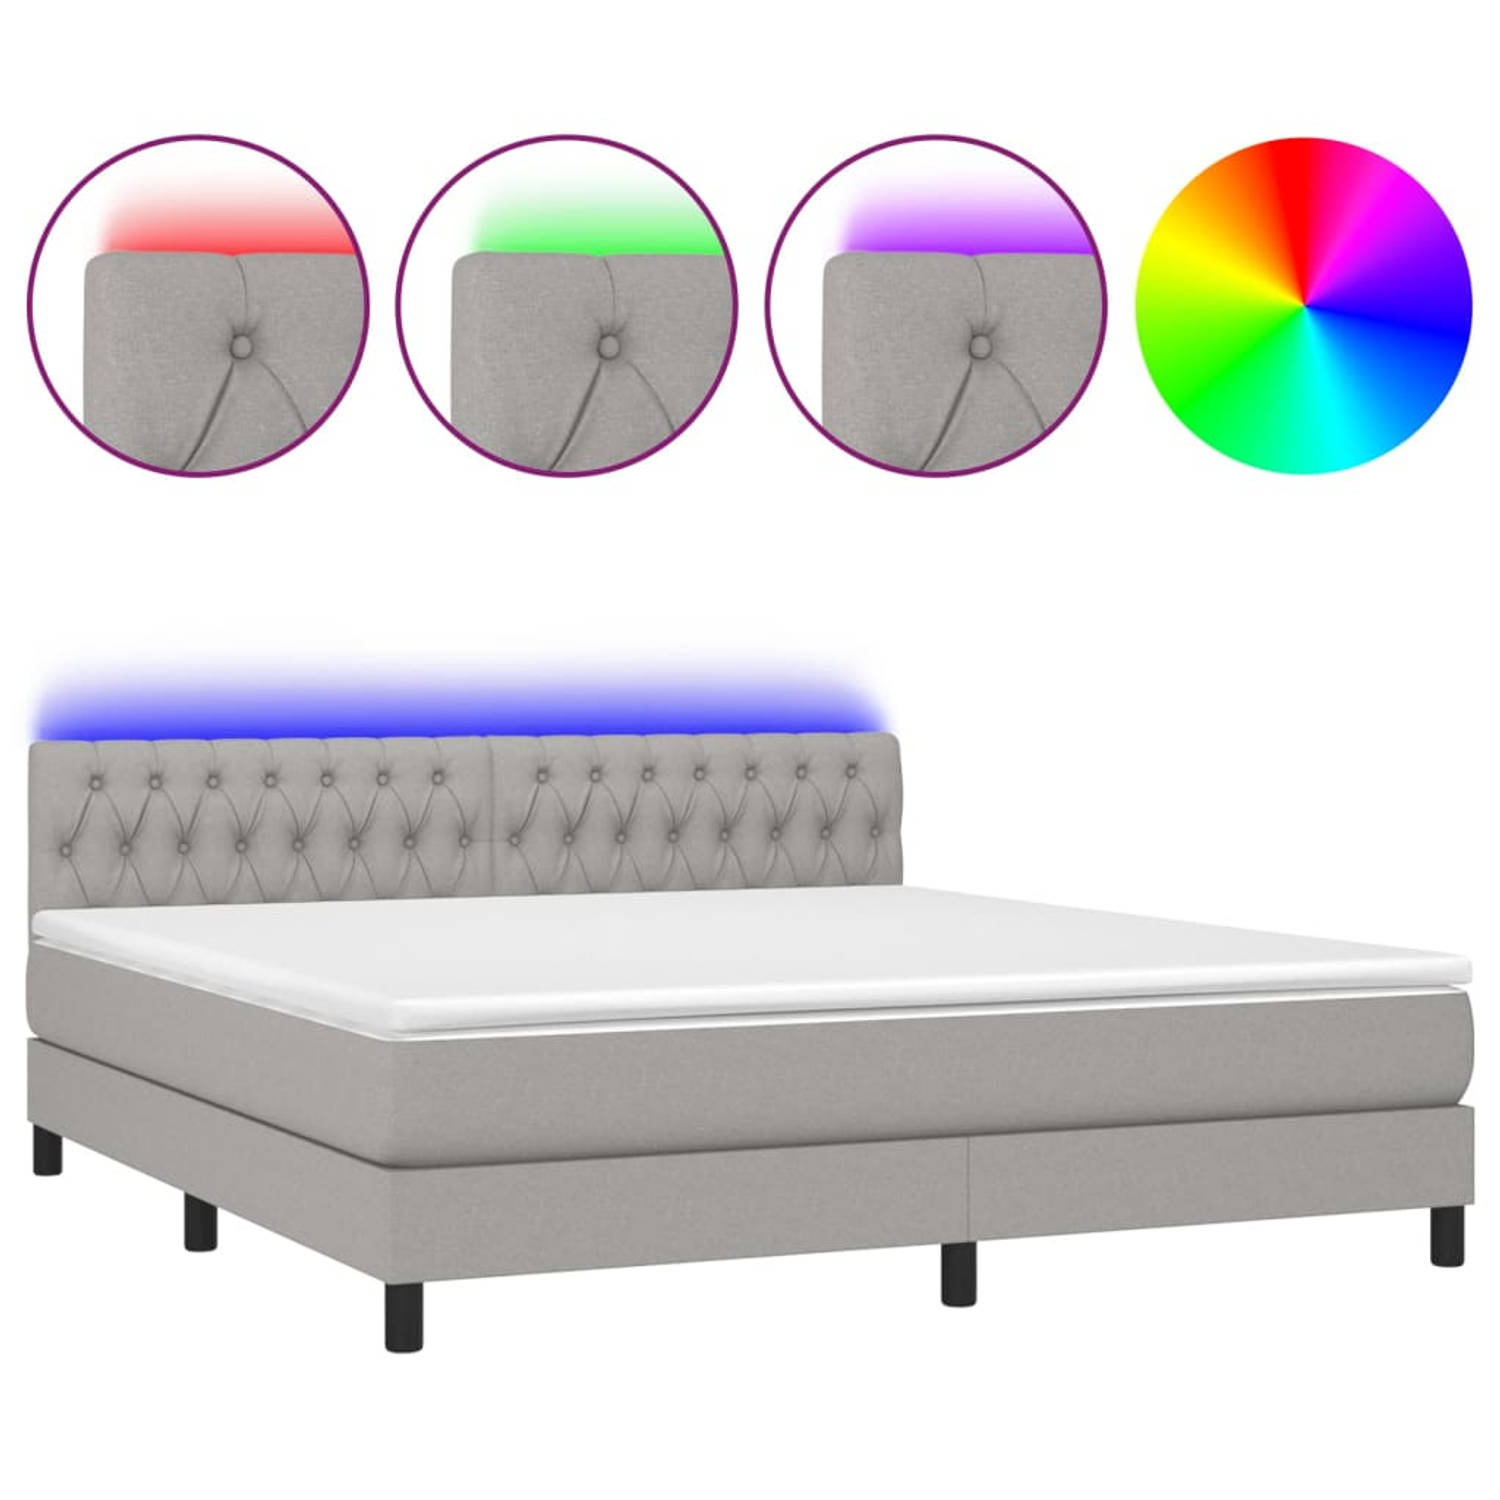 The Living Store Boxspring met matras en LED stof lichtgrijs 180x200 cm - Boxspring - Boxsprings - Bed - Slaapmeubel - Boxspringbed - Boxspring Bed - Tweepersoonsbed - Bed Met Matr